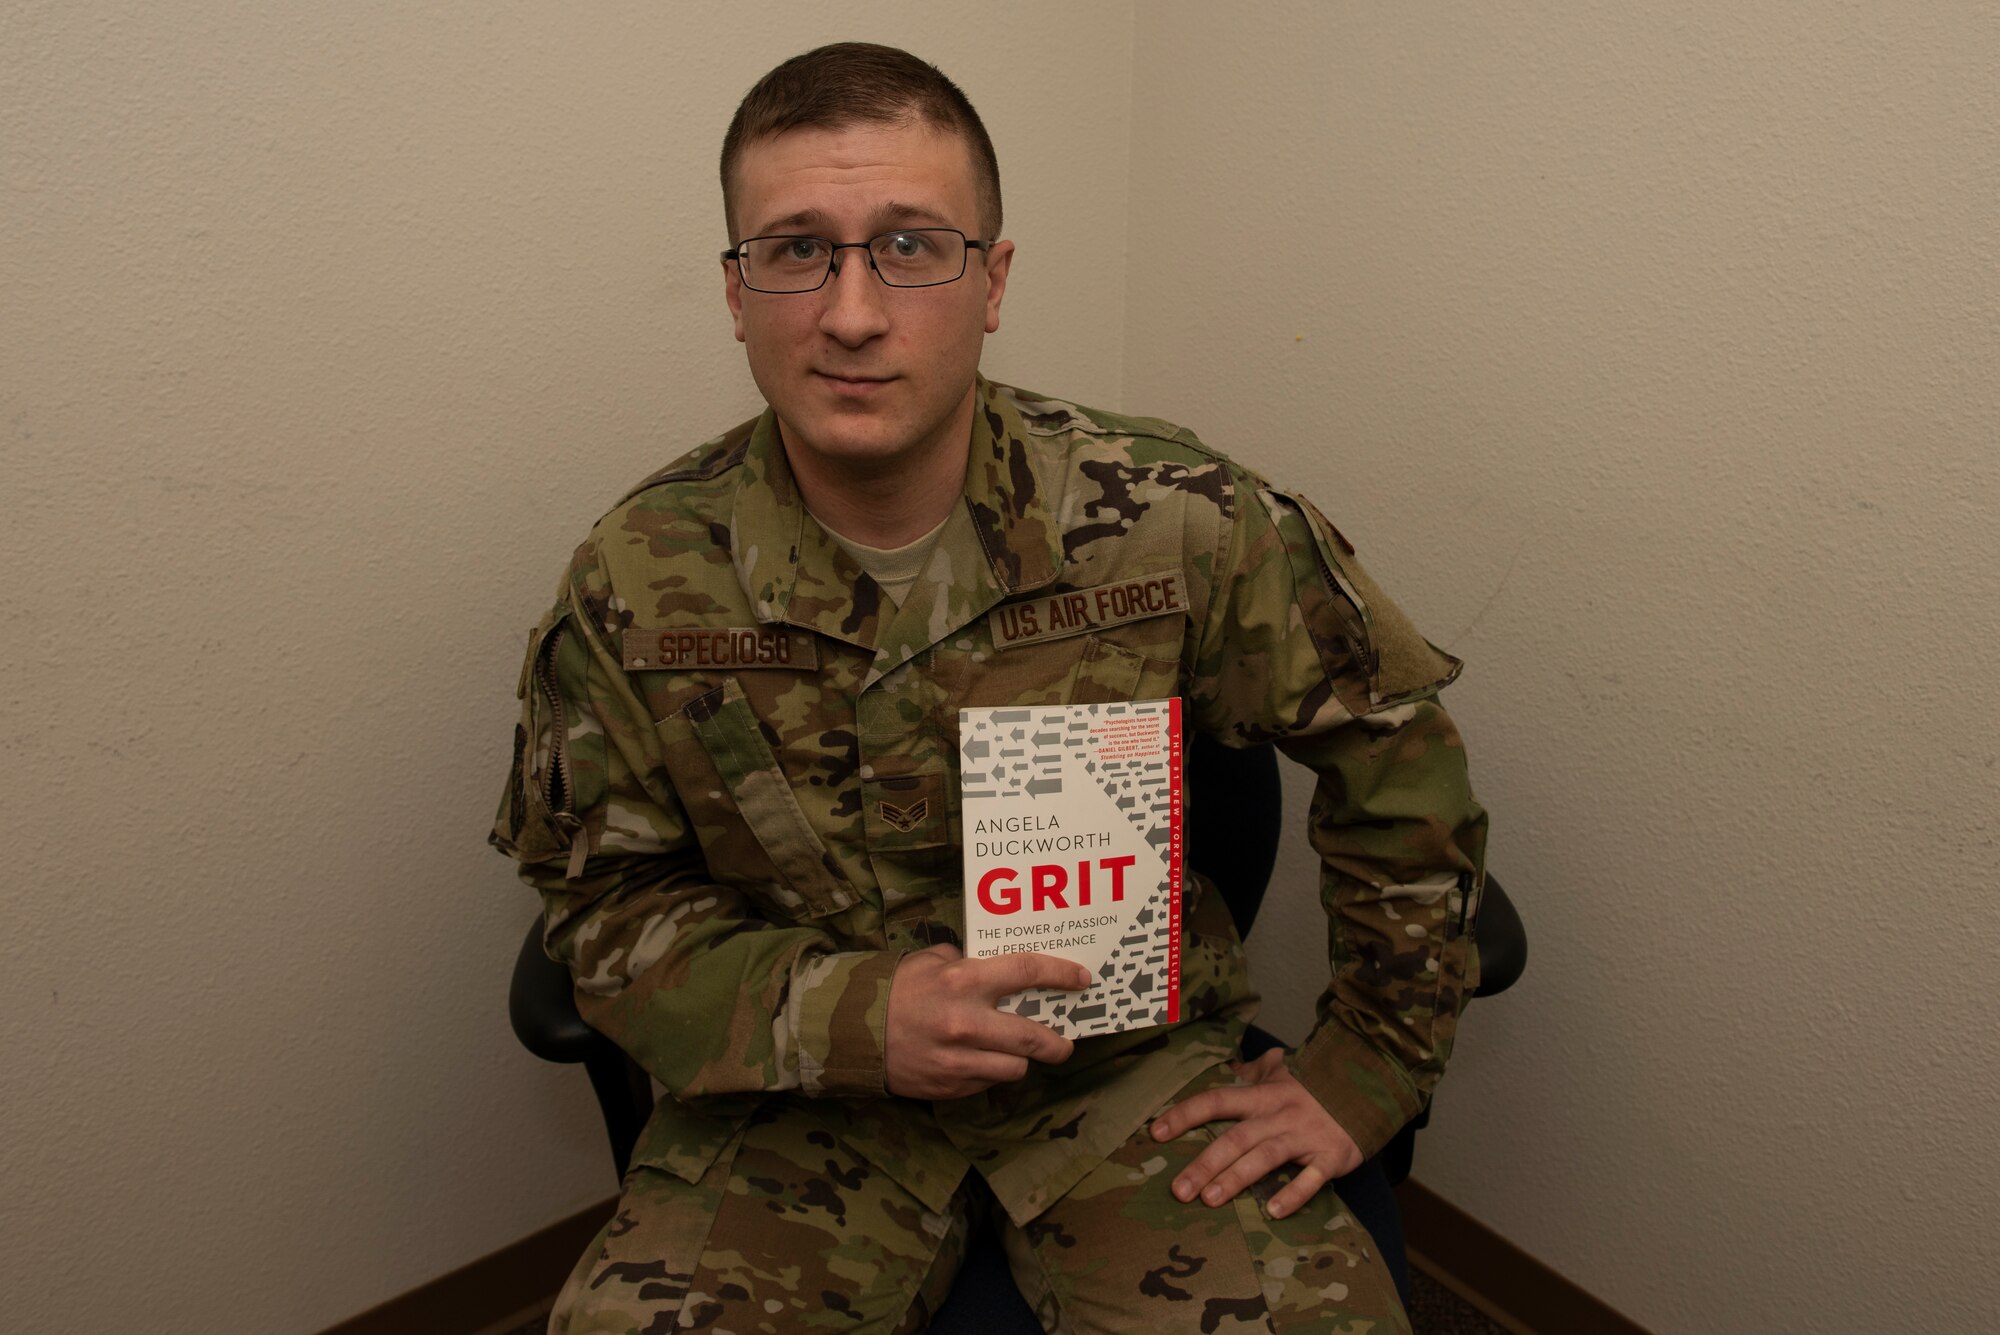 U.S. Air Force Senior Airman Michael Specioso, 60th Security Forces Squadron acting NCO in charge of vehicle operations, holds the book “Grit: The Power of Passion and Perseverance” by Angela Duckworth March 7, 2019 at Travis Air Force Base, California. The book was the first in the newly implemented professional literature program at Travis where participants read one book a month and provide feedback on what they learned during a monthly discussion group. (U.S. Air Force photo by Tech. Sgt. James Hodgman)